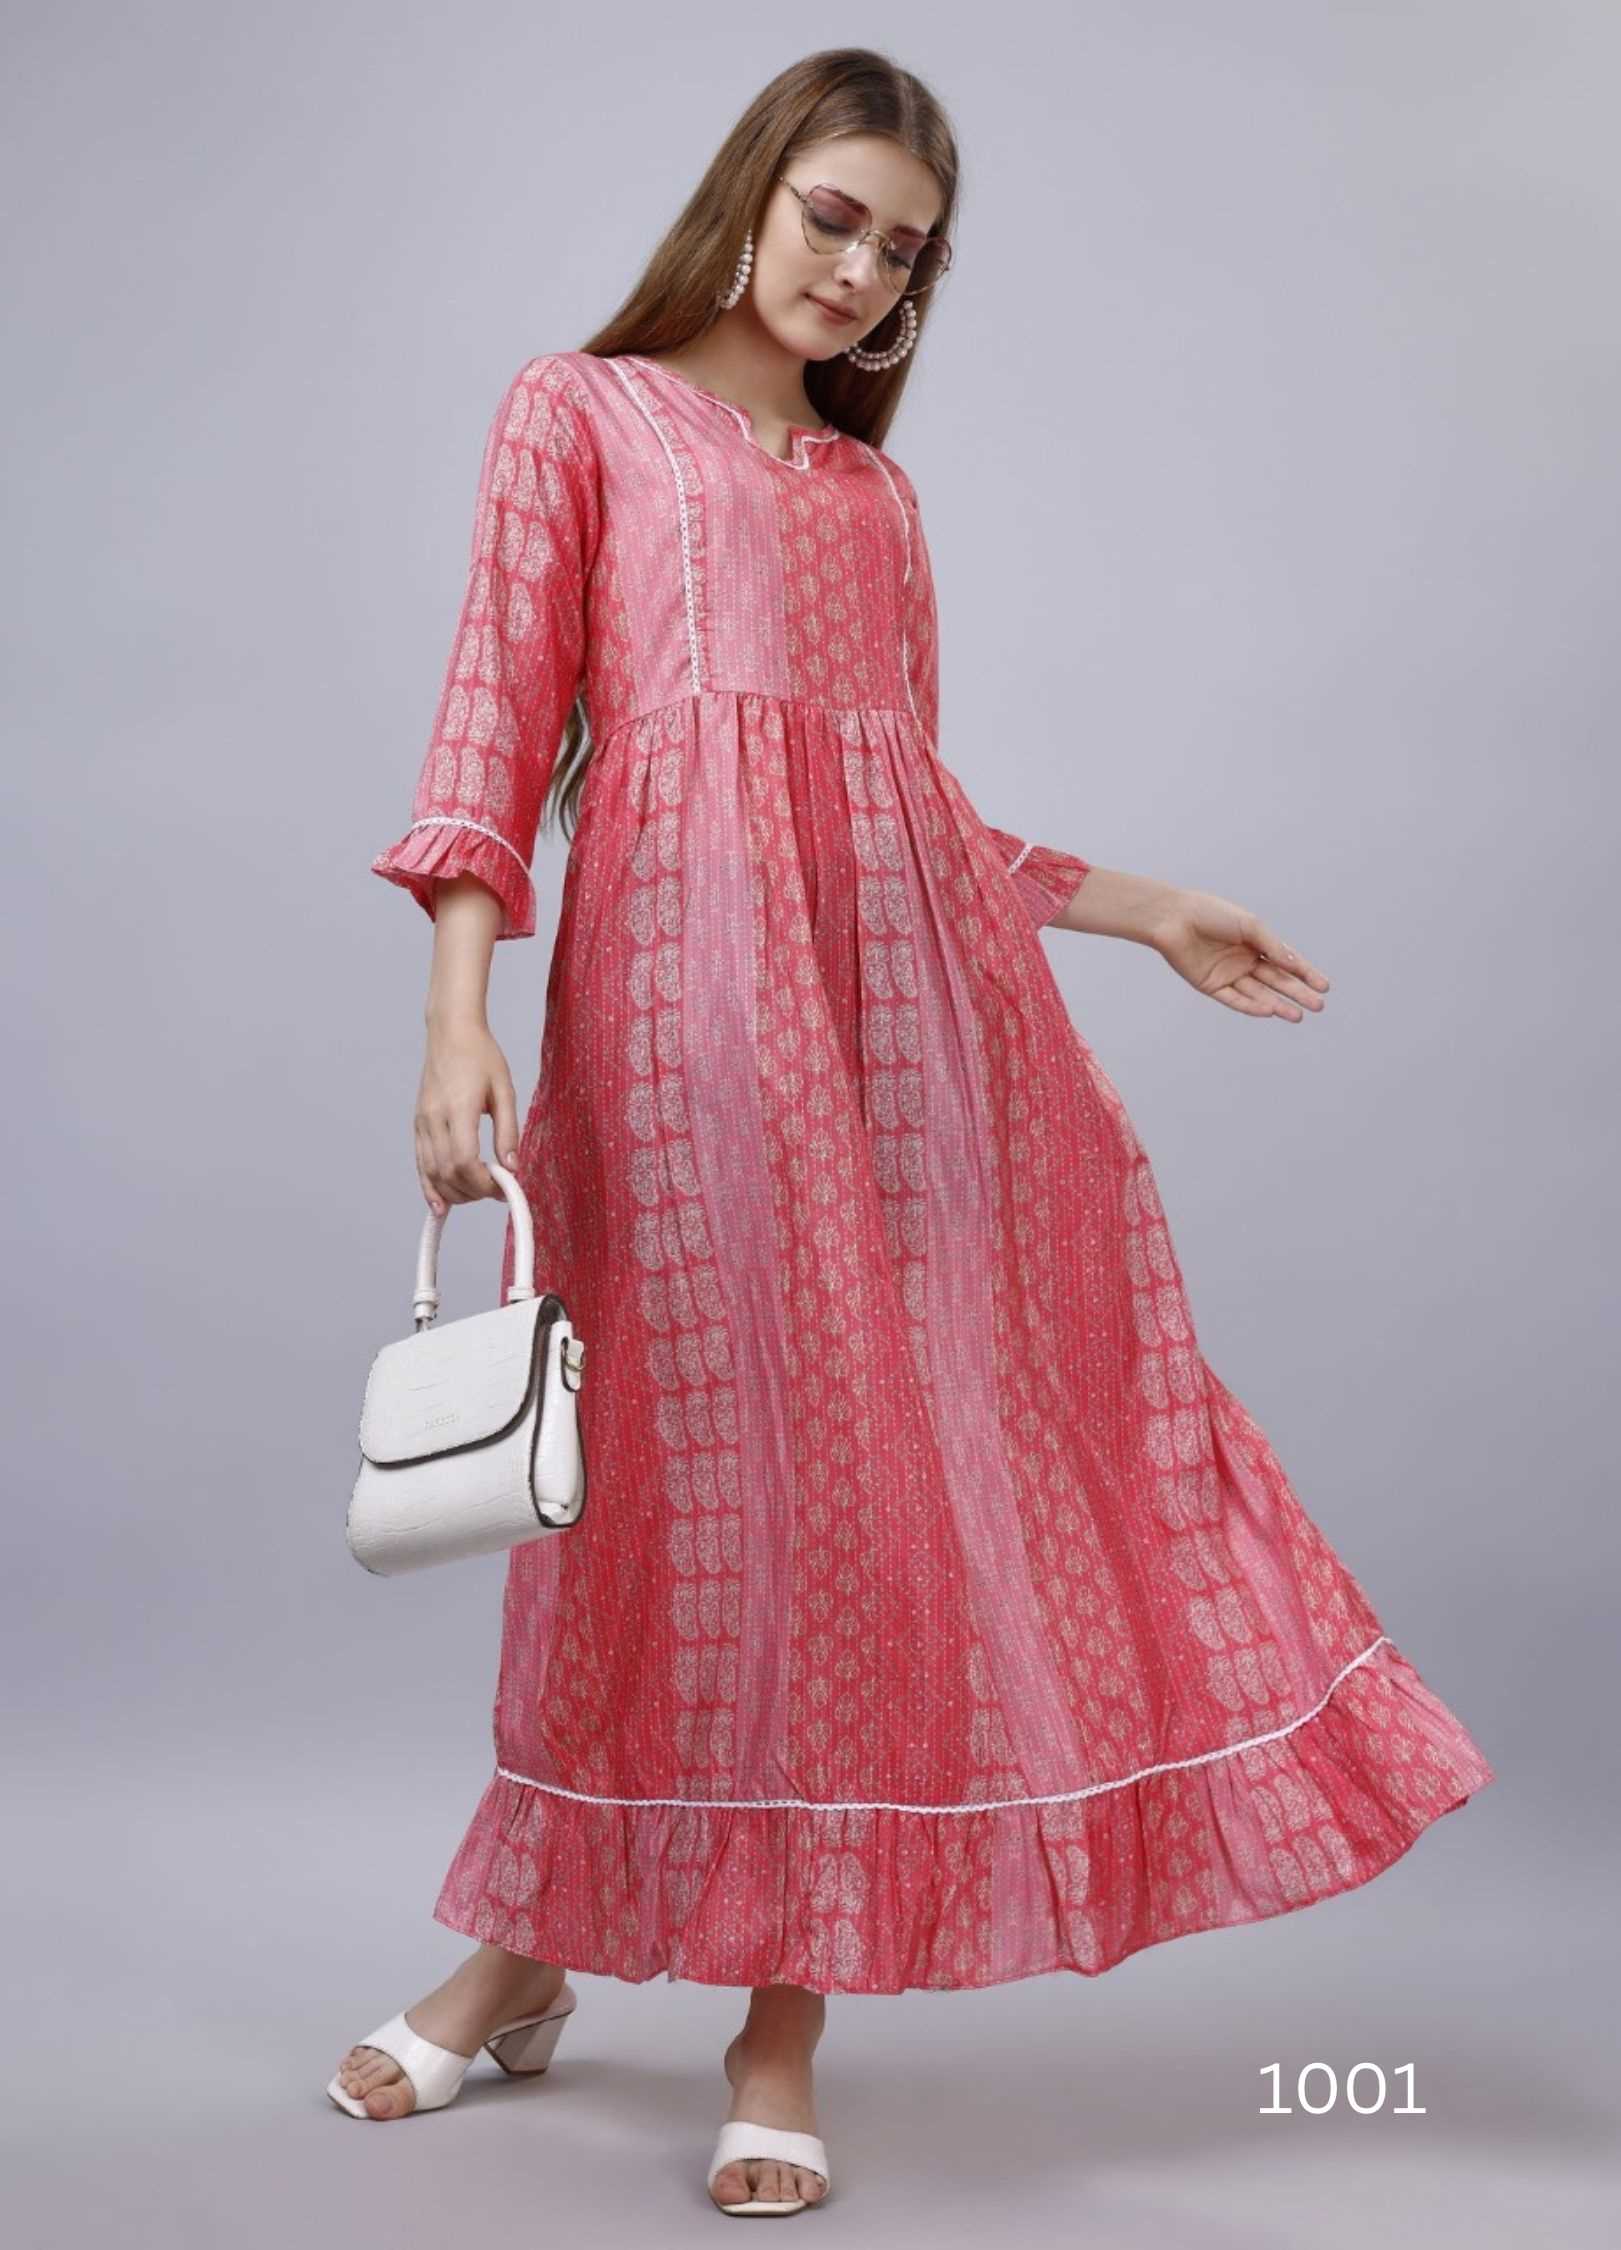 Discover 127+ long kurti designs with lace super hot